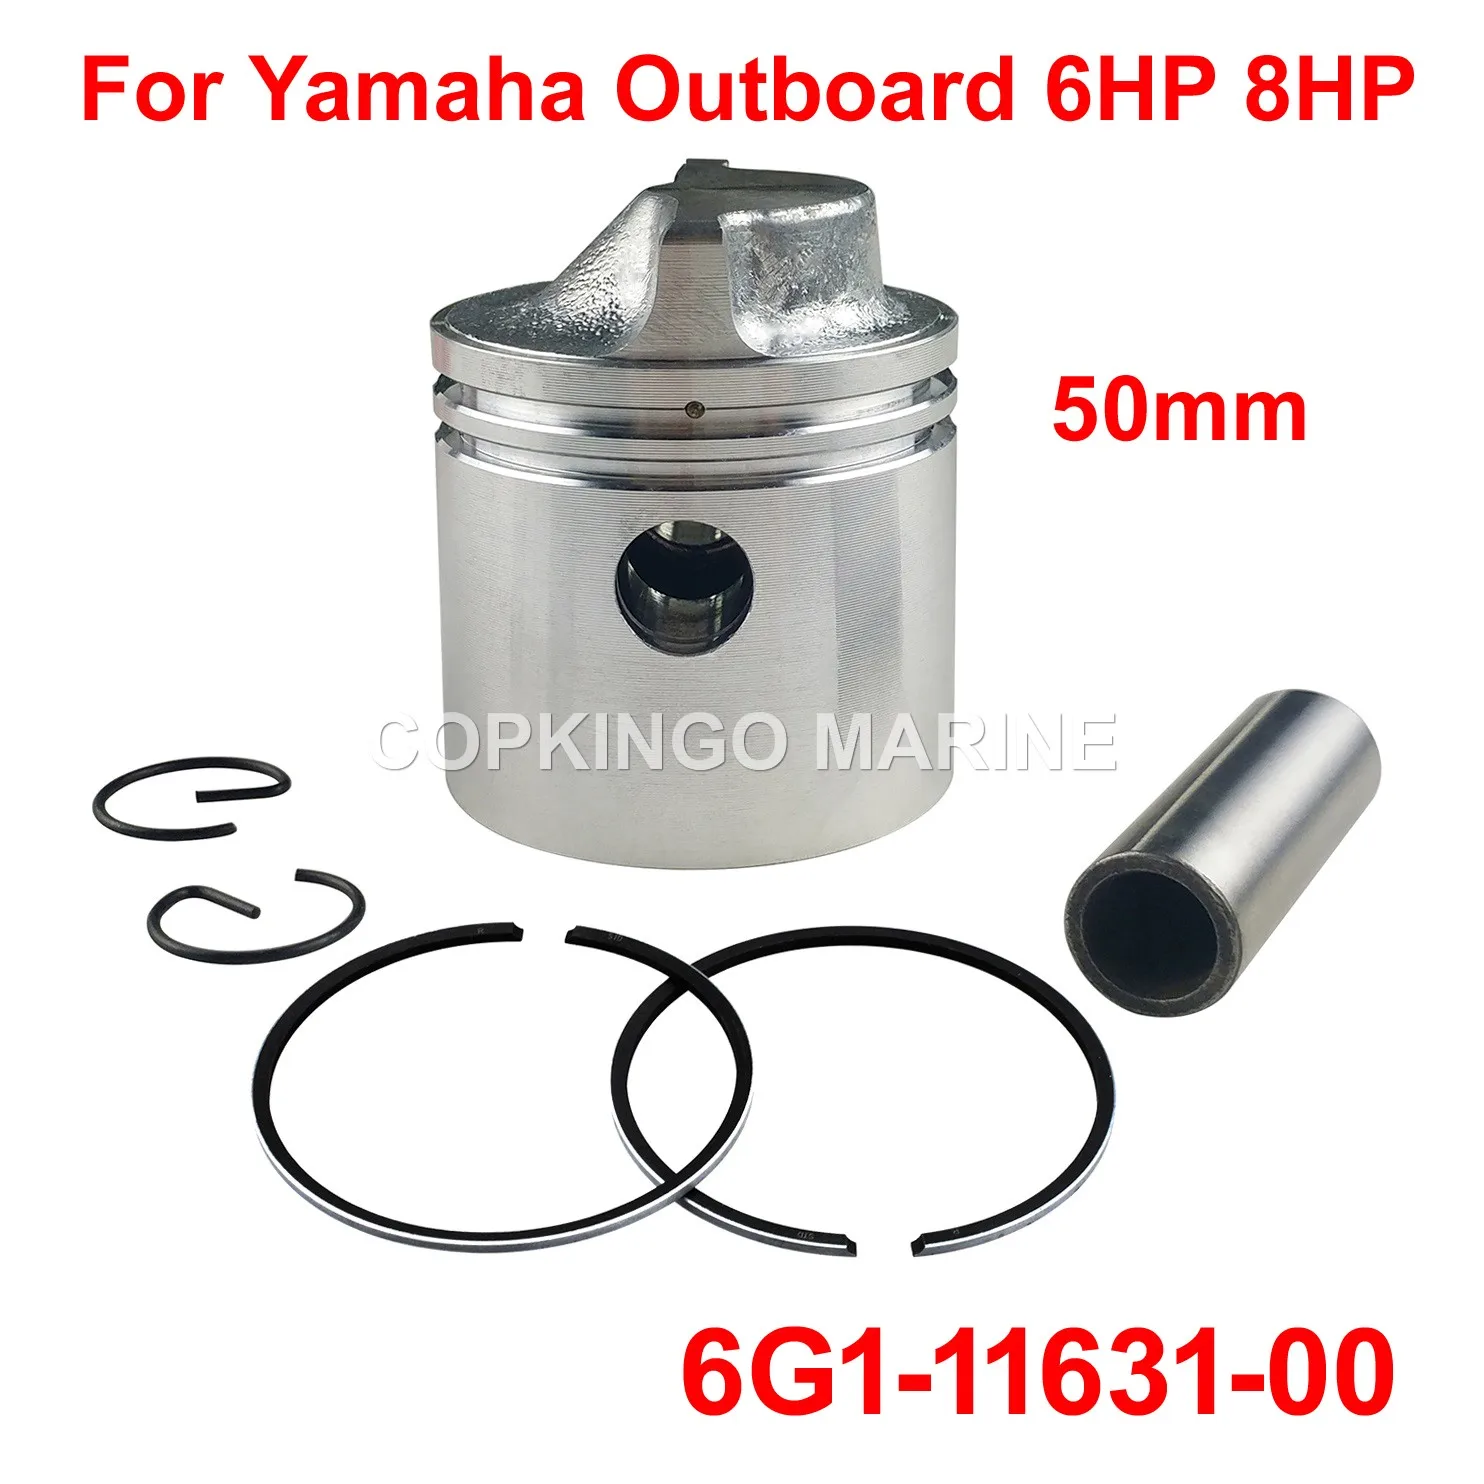 

Boat Piston Kit Std 6G1-11631-00-98 For Yamaha Outboard Motor 2T 6HP 8HP; Dia.:50mm